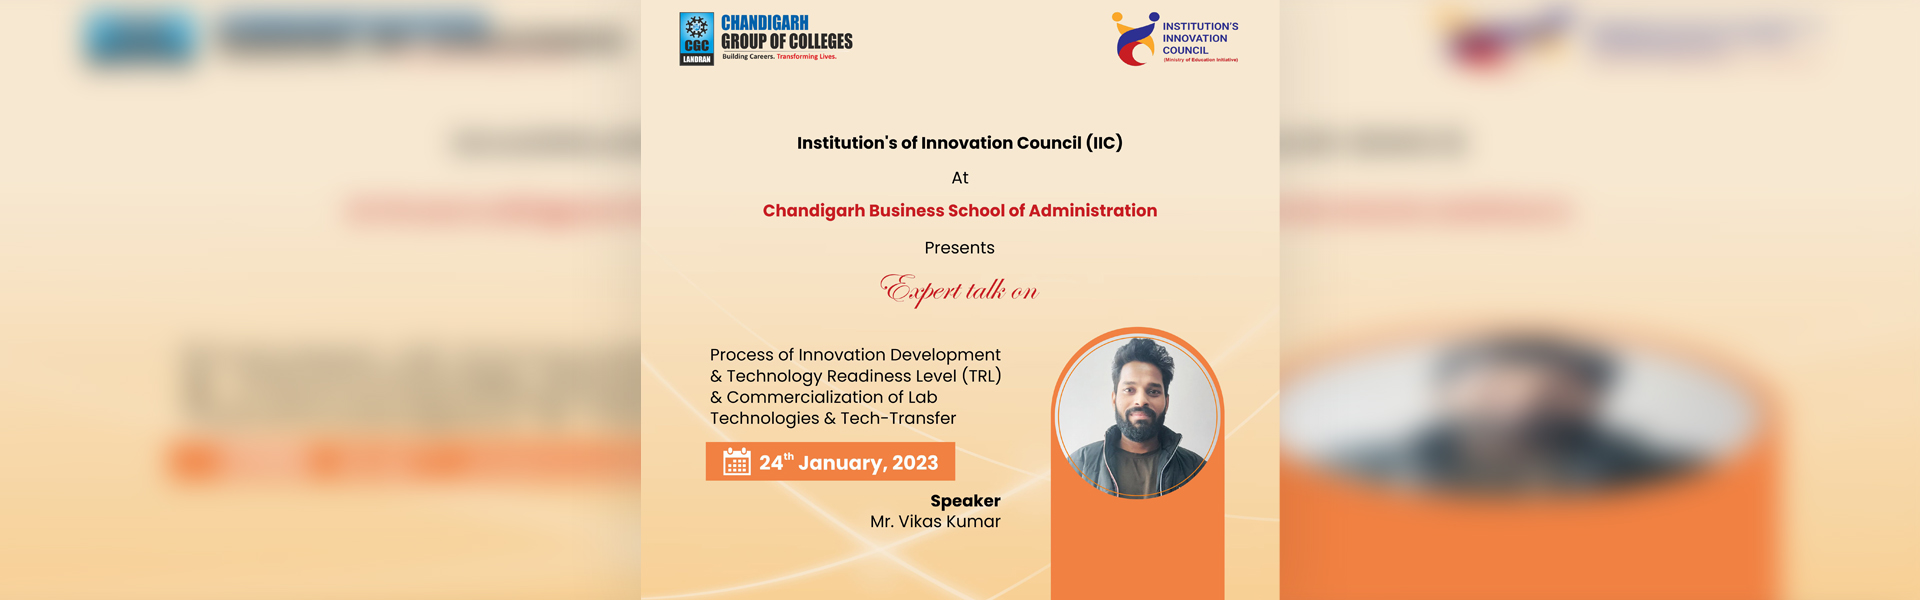 Expert talk- “Process of Innovation Development & Technology Readiness Level (TRL)"  & "Commercialization of Lab Technologies & Tech-Transfer”  on 24 th January, 2023 